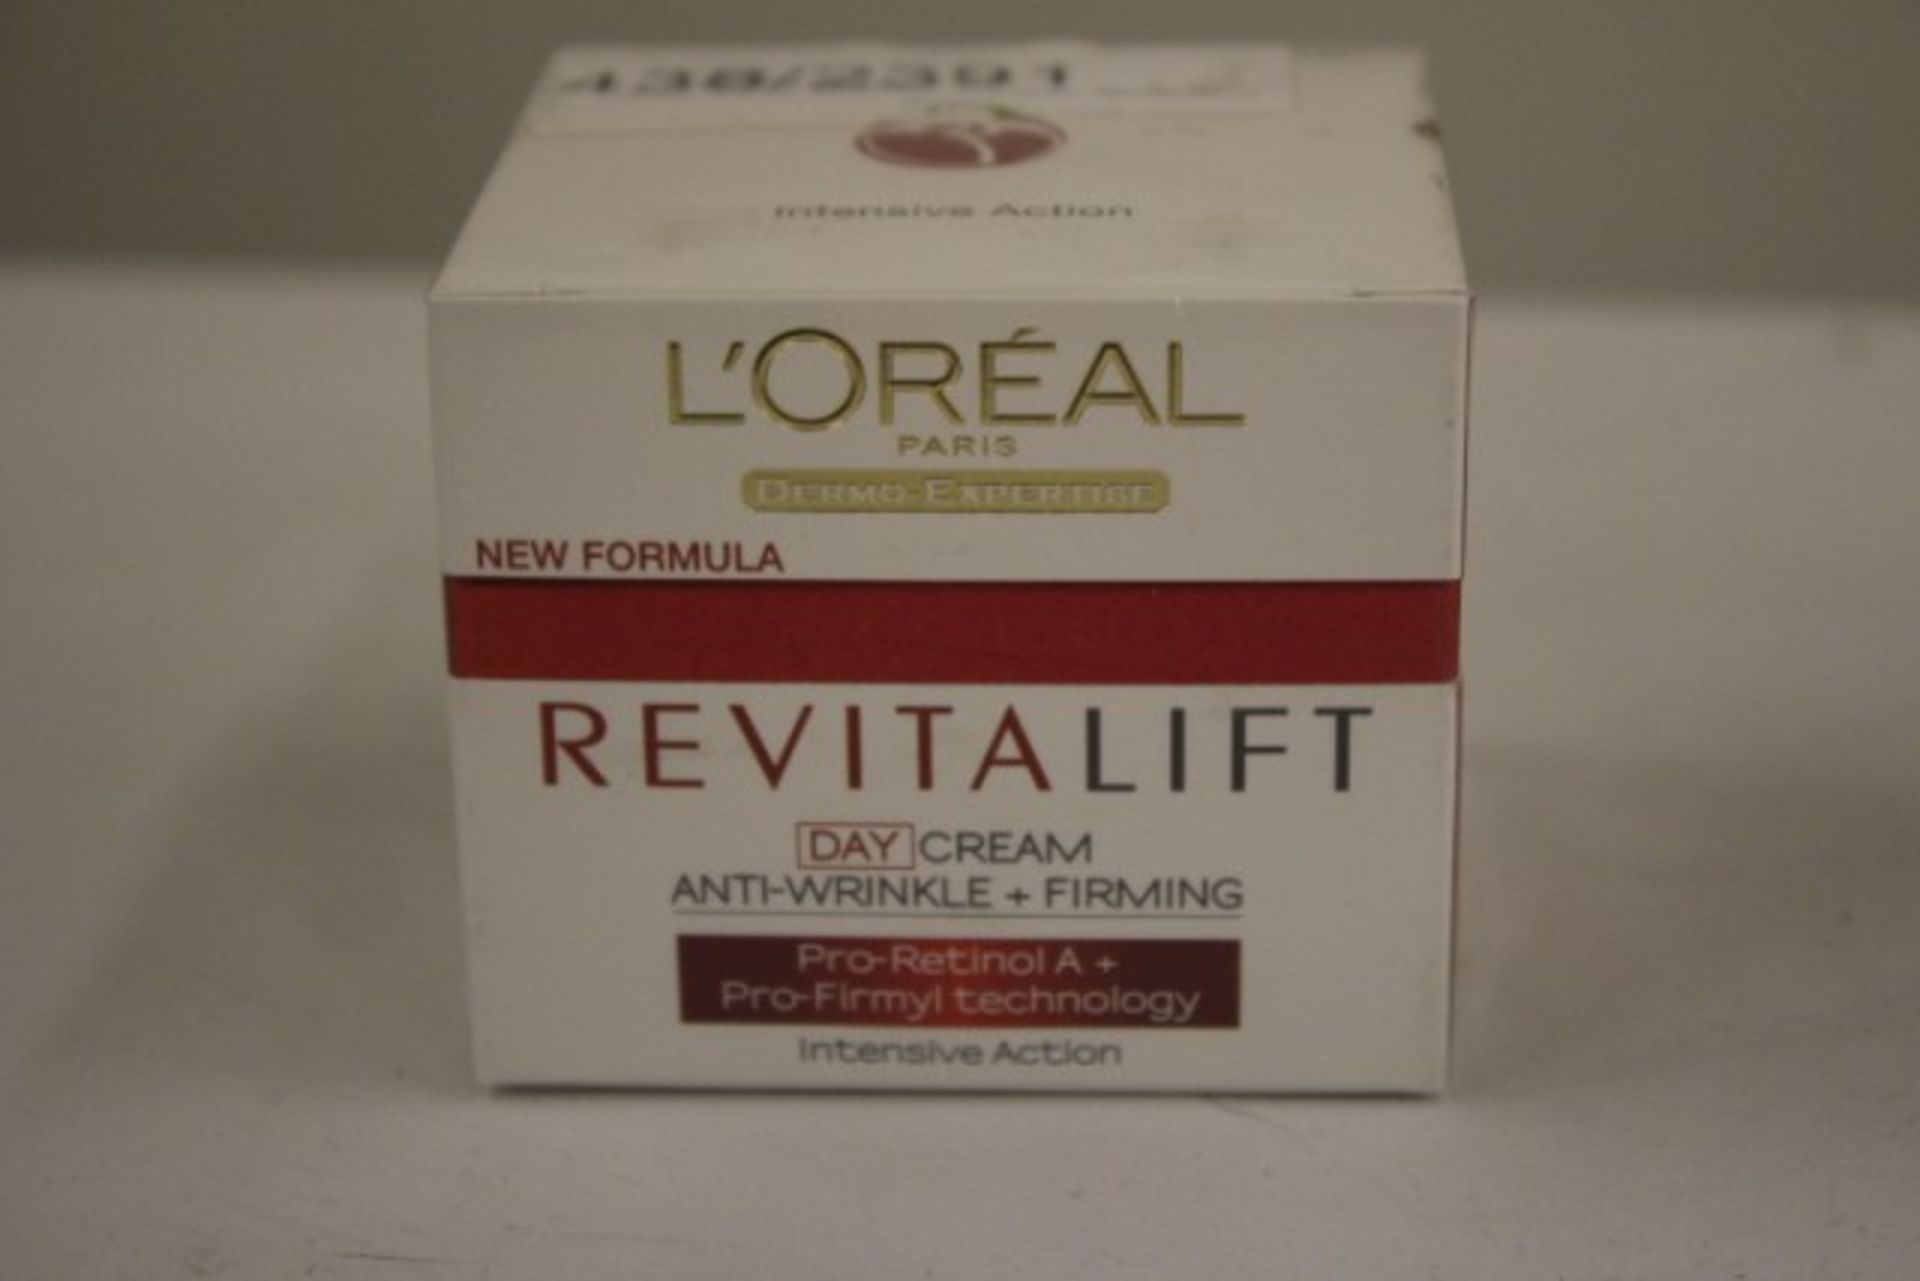 V *TRADE QTY* Brand New L'Oreal Dermo-Expertise Revitalift Anti-Wrinkle + Firming Day Cream 50ml ISP